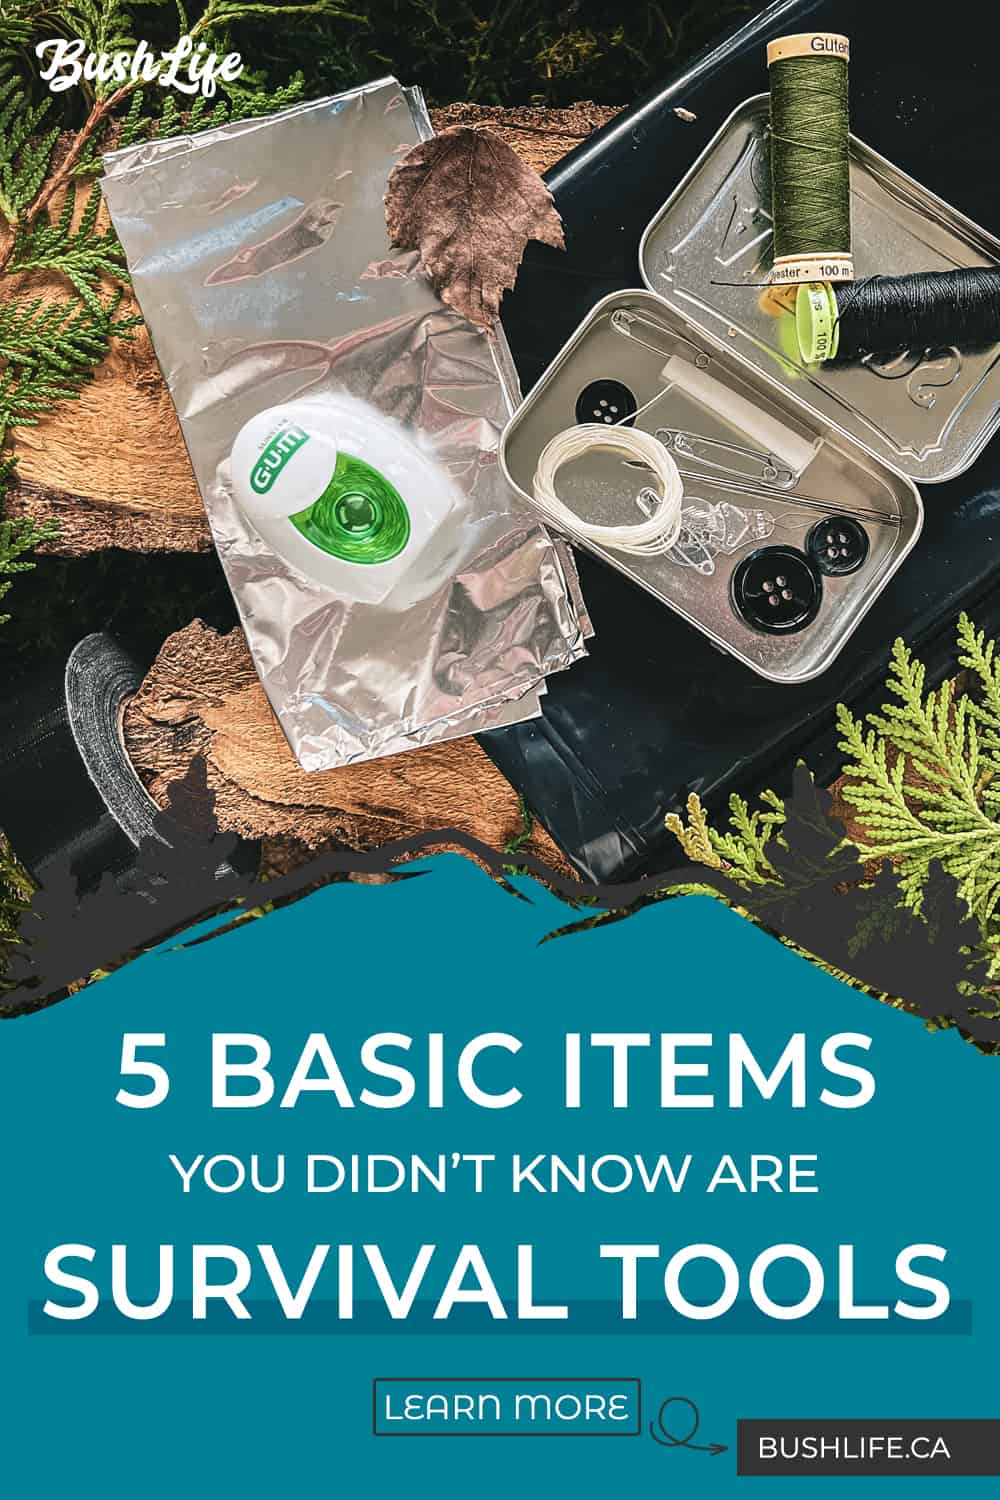 5 Basic Items You Didn't Know Are Survival Tools